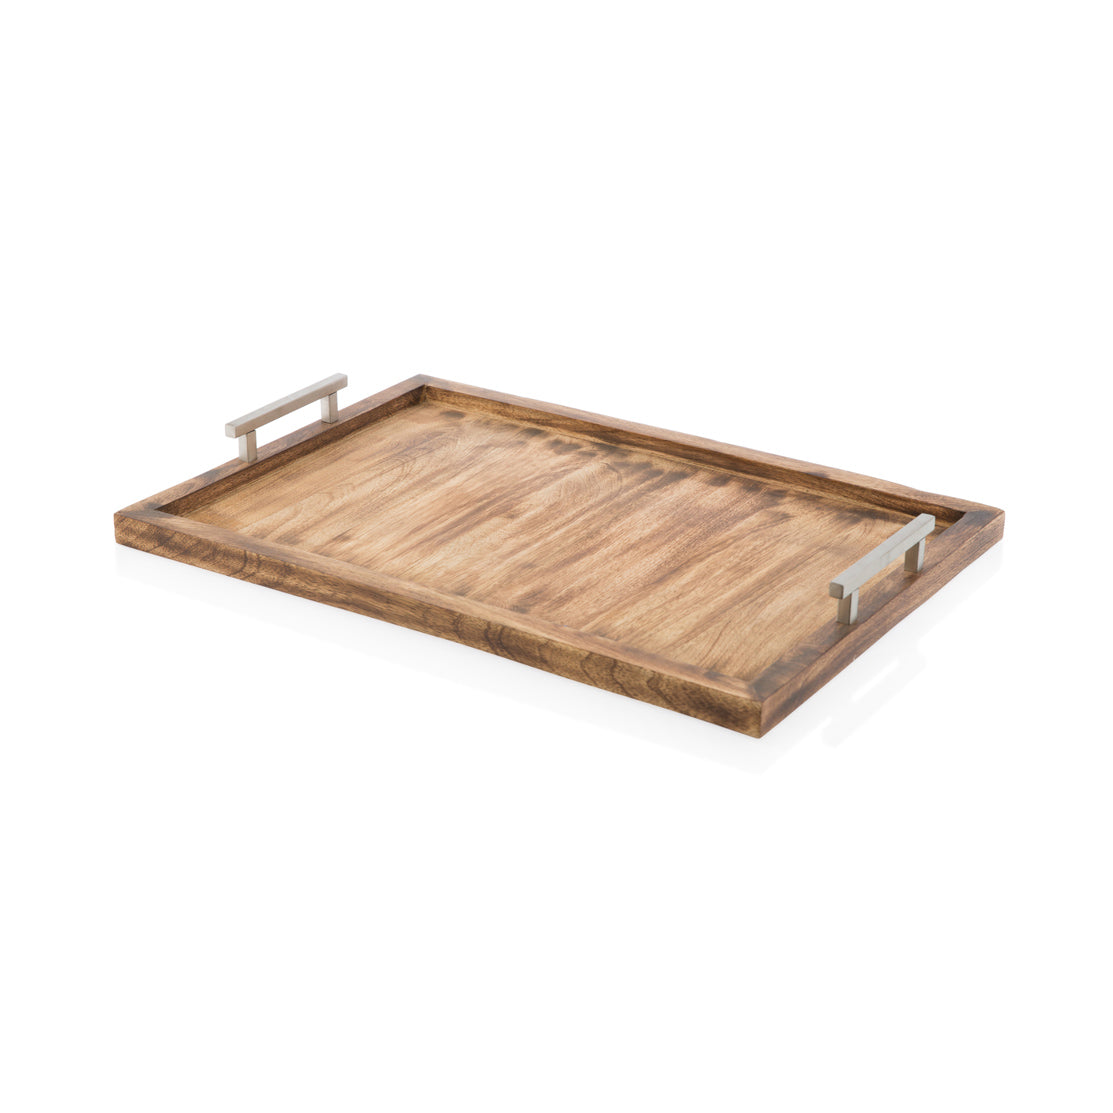 Rectanglewood Tray With Steel Handles